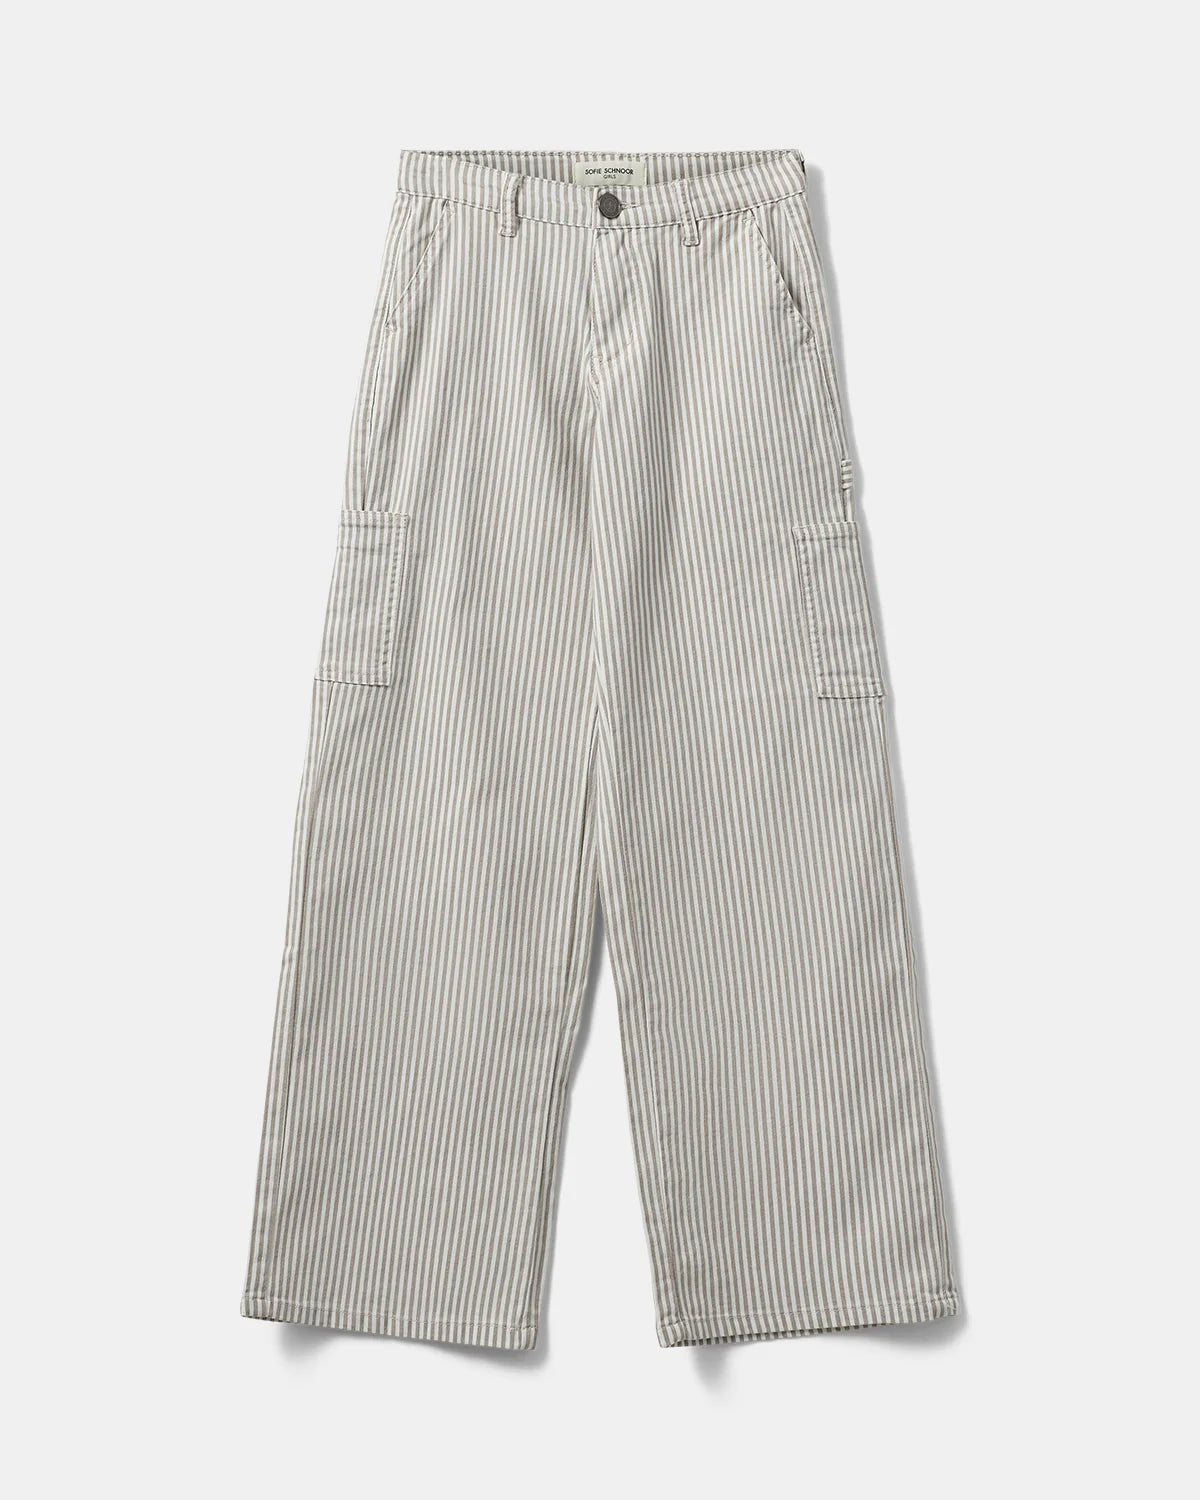 Loose Fit Workwear Trousers